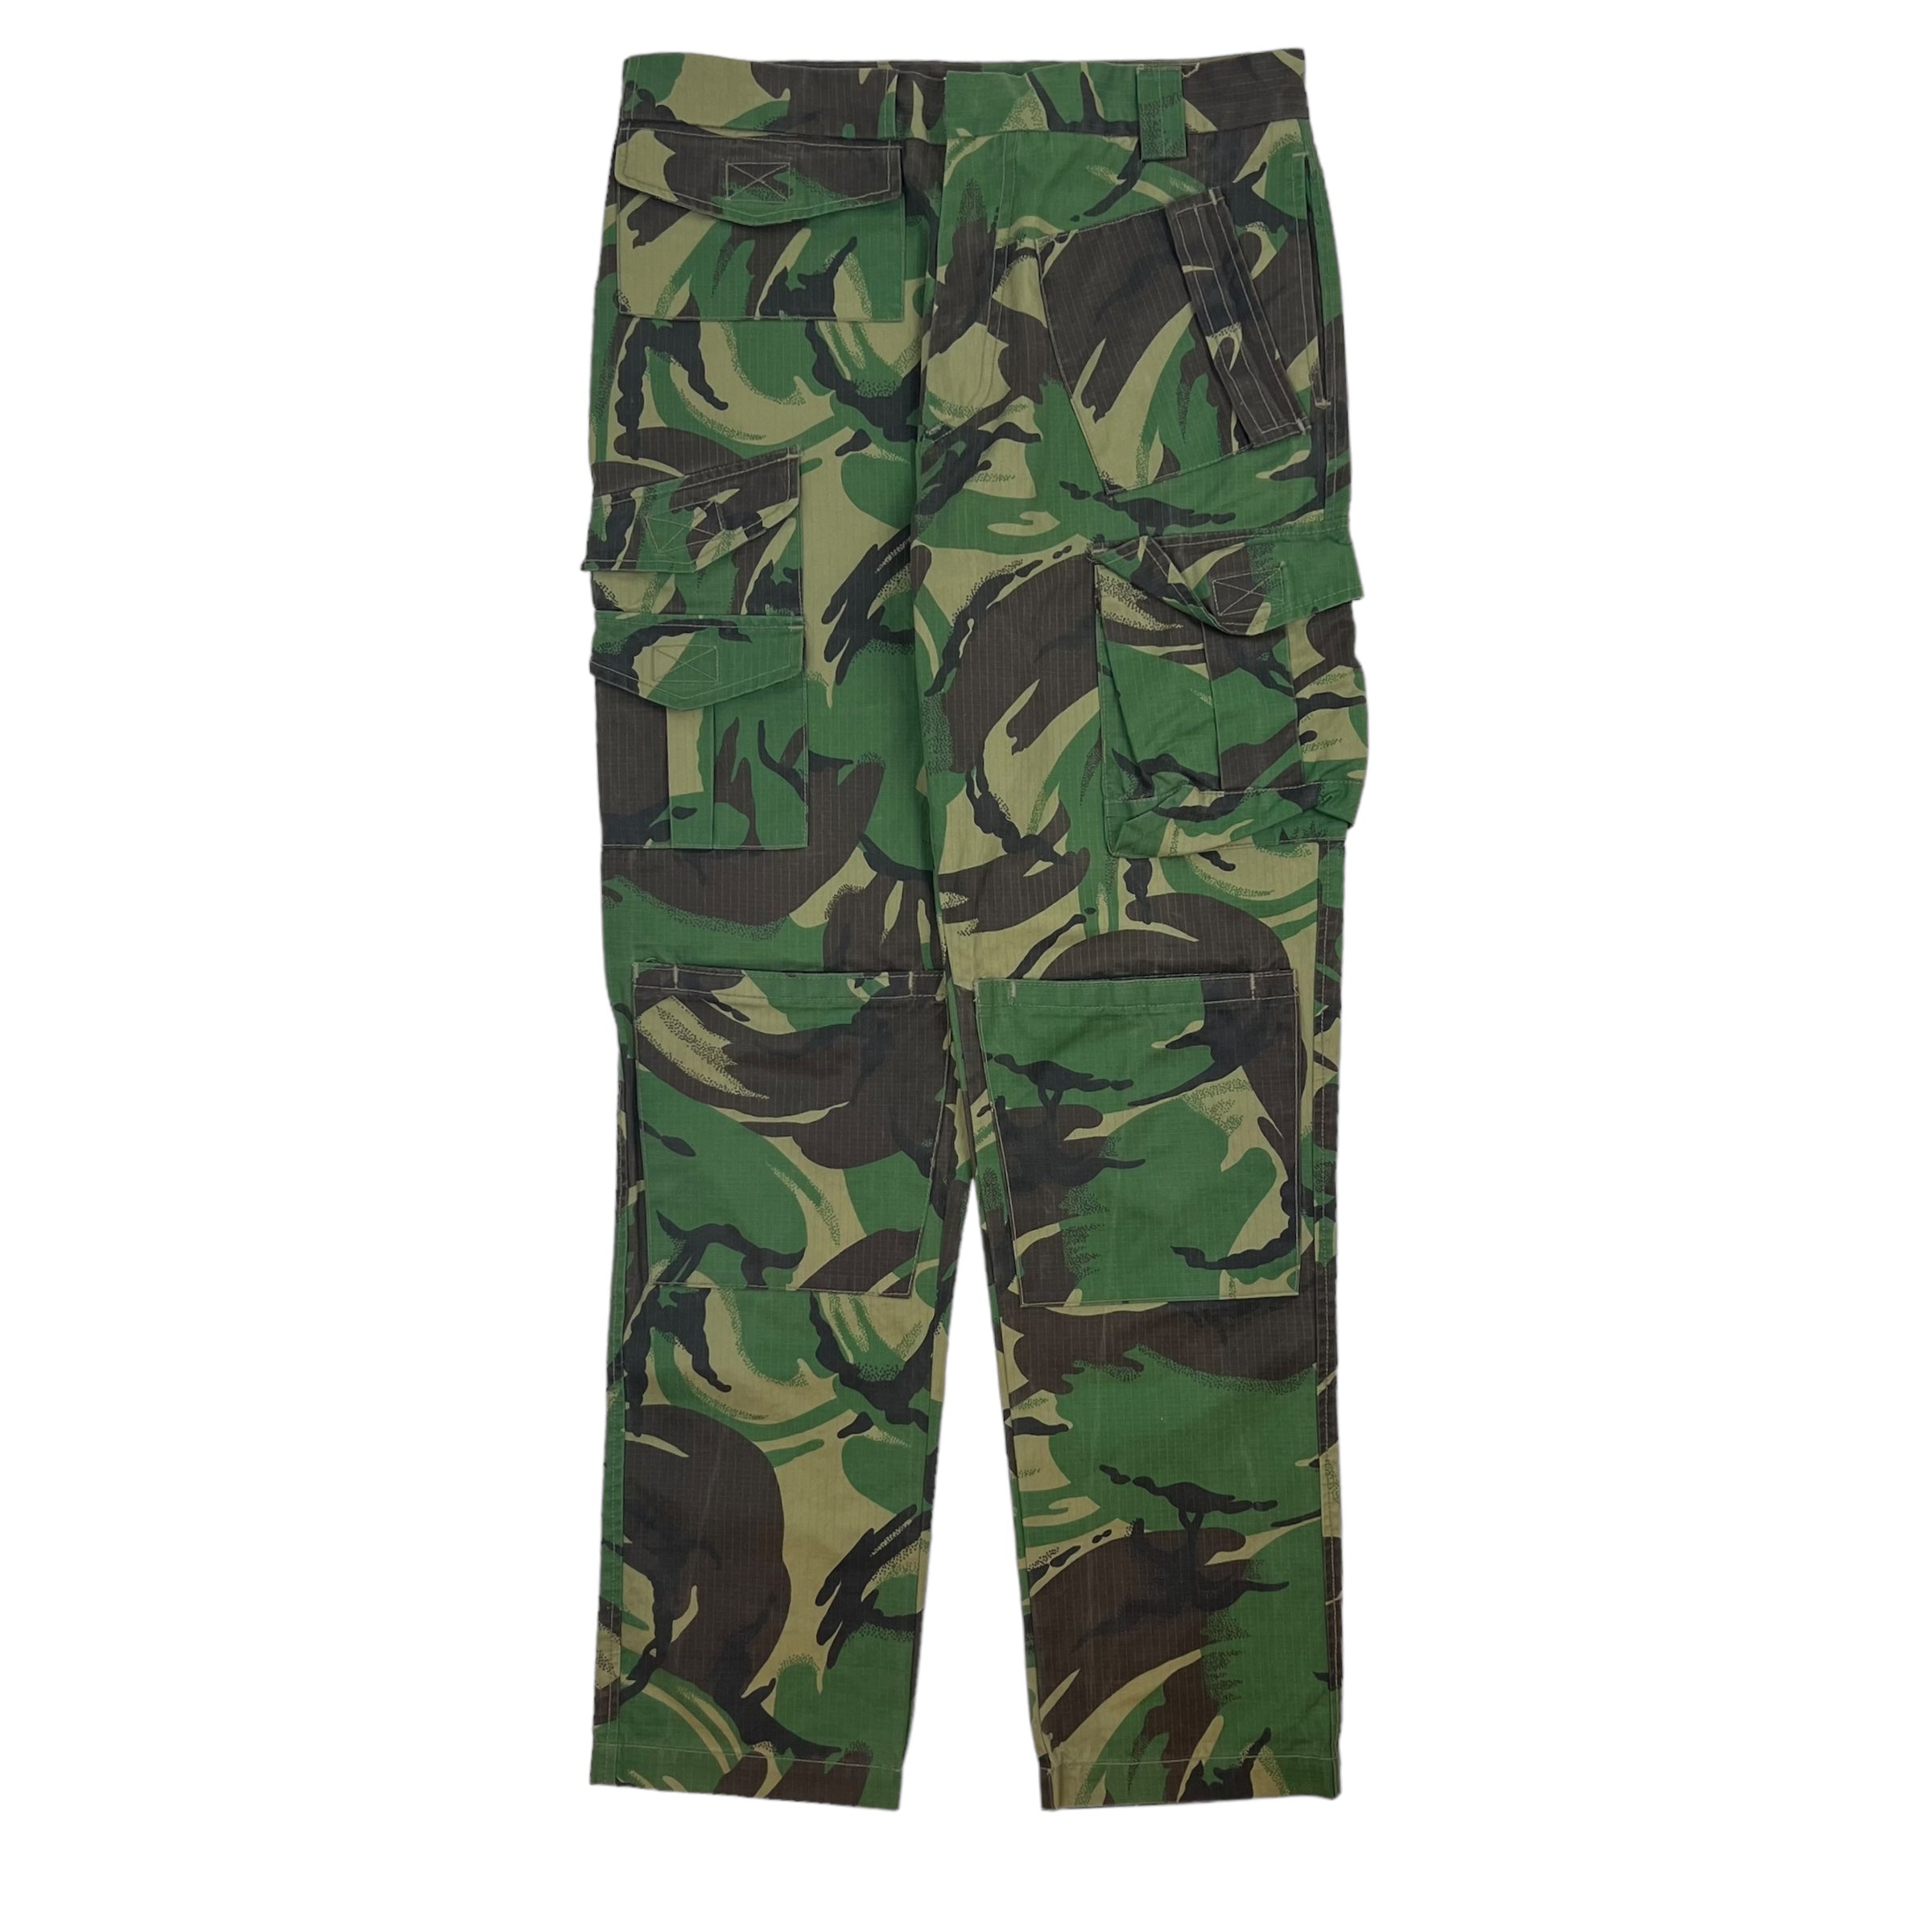 CMMN SWDN Multi-Pocket Camouflage Cargo Pant